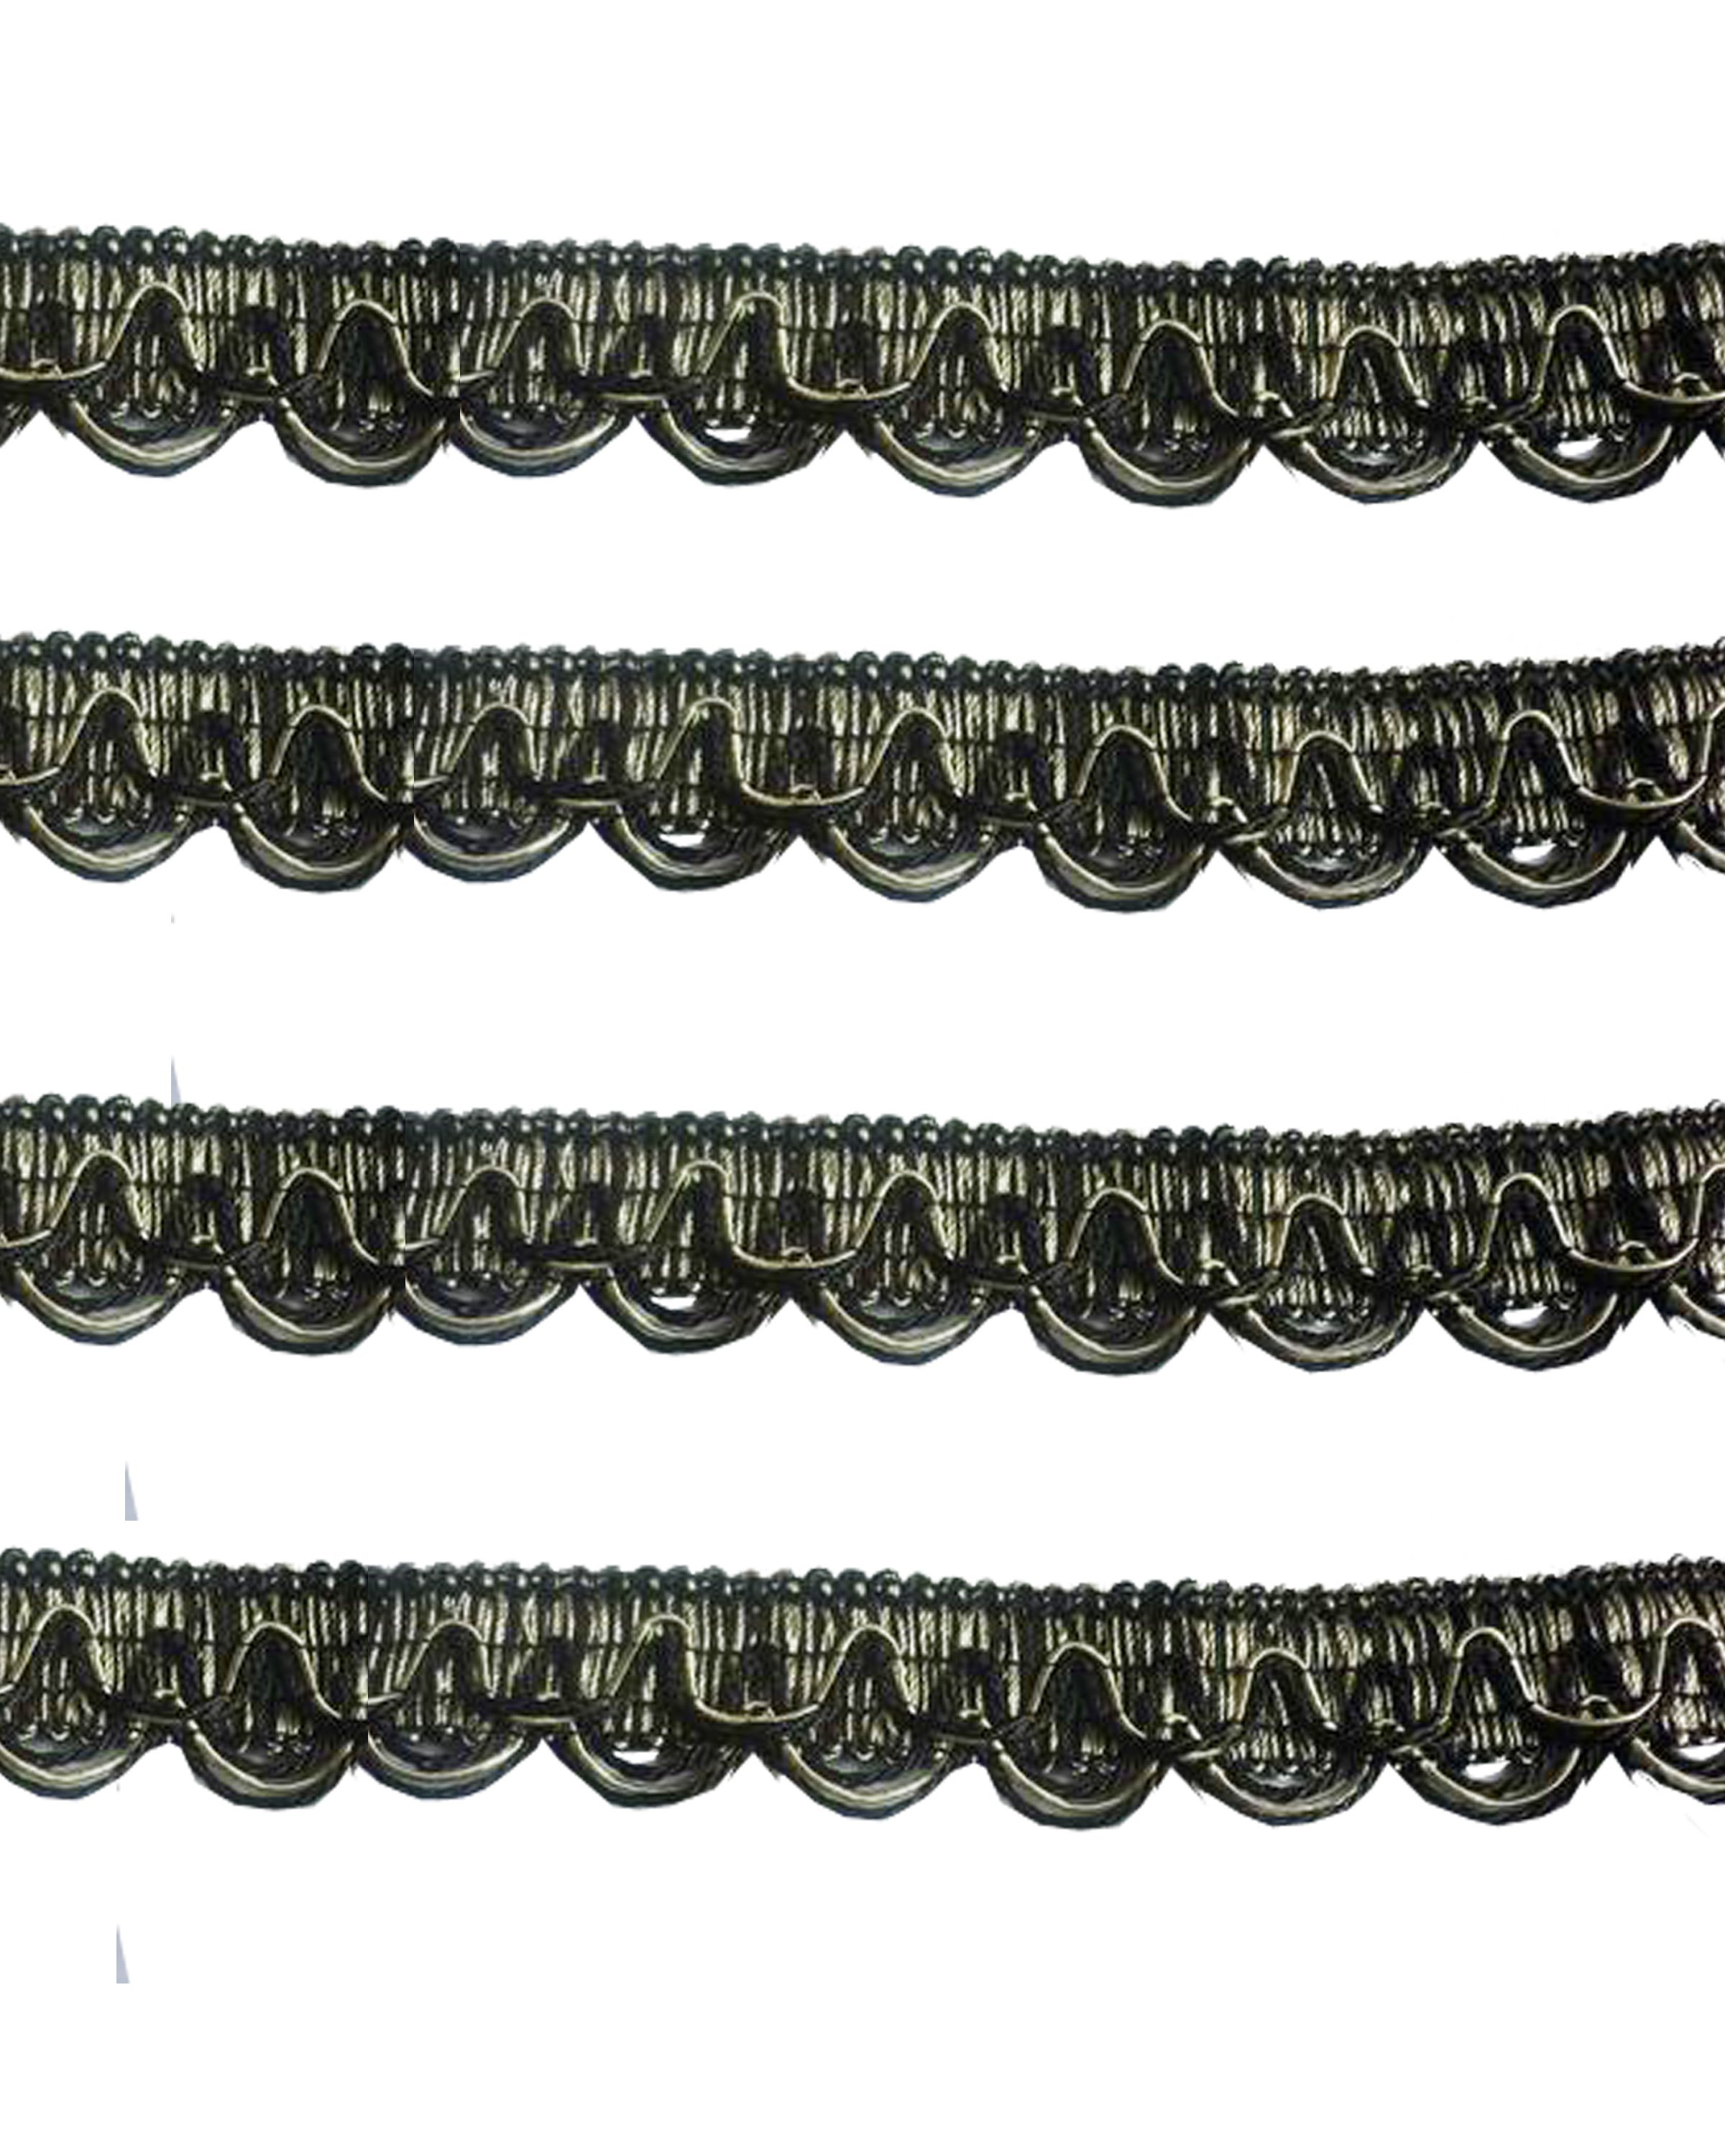 Scalloped Braid - Black / Silver 30mm Price is for 5 metres